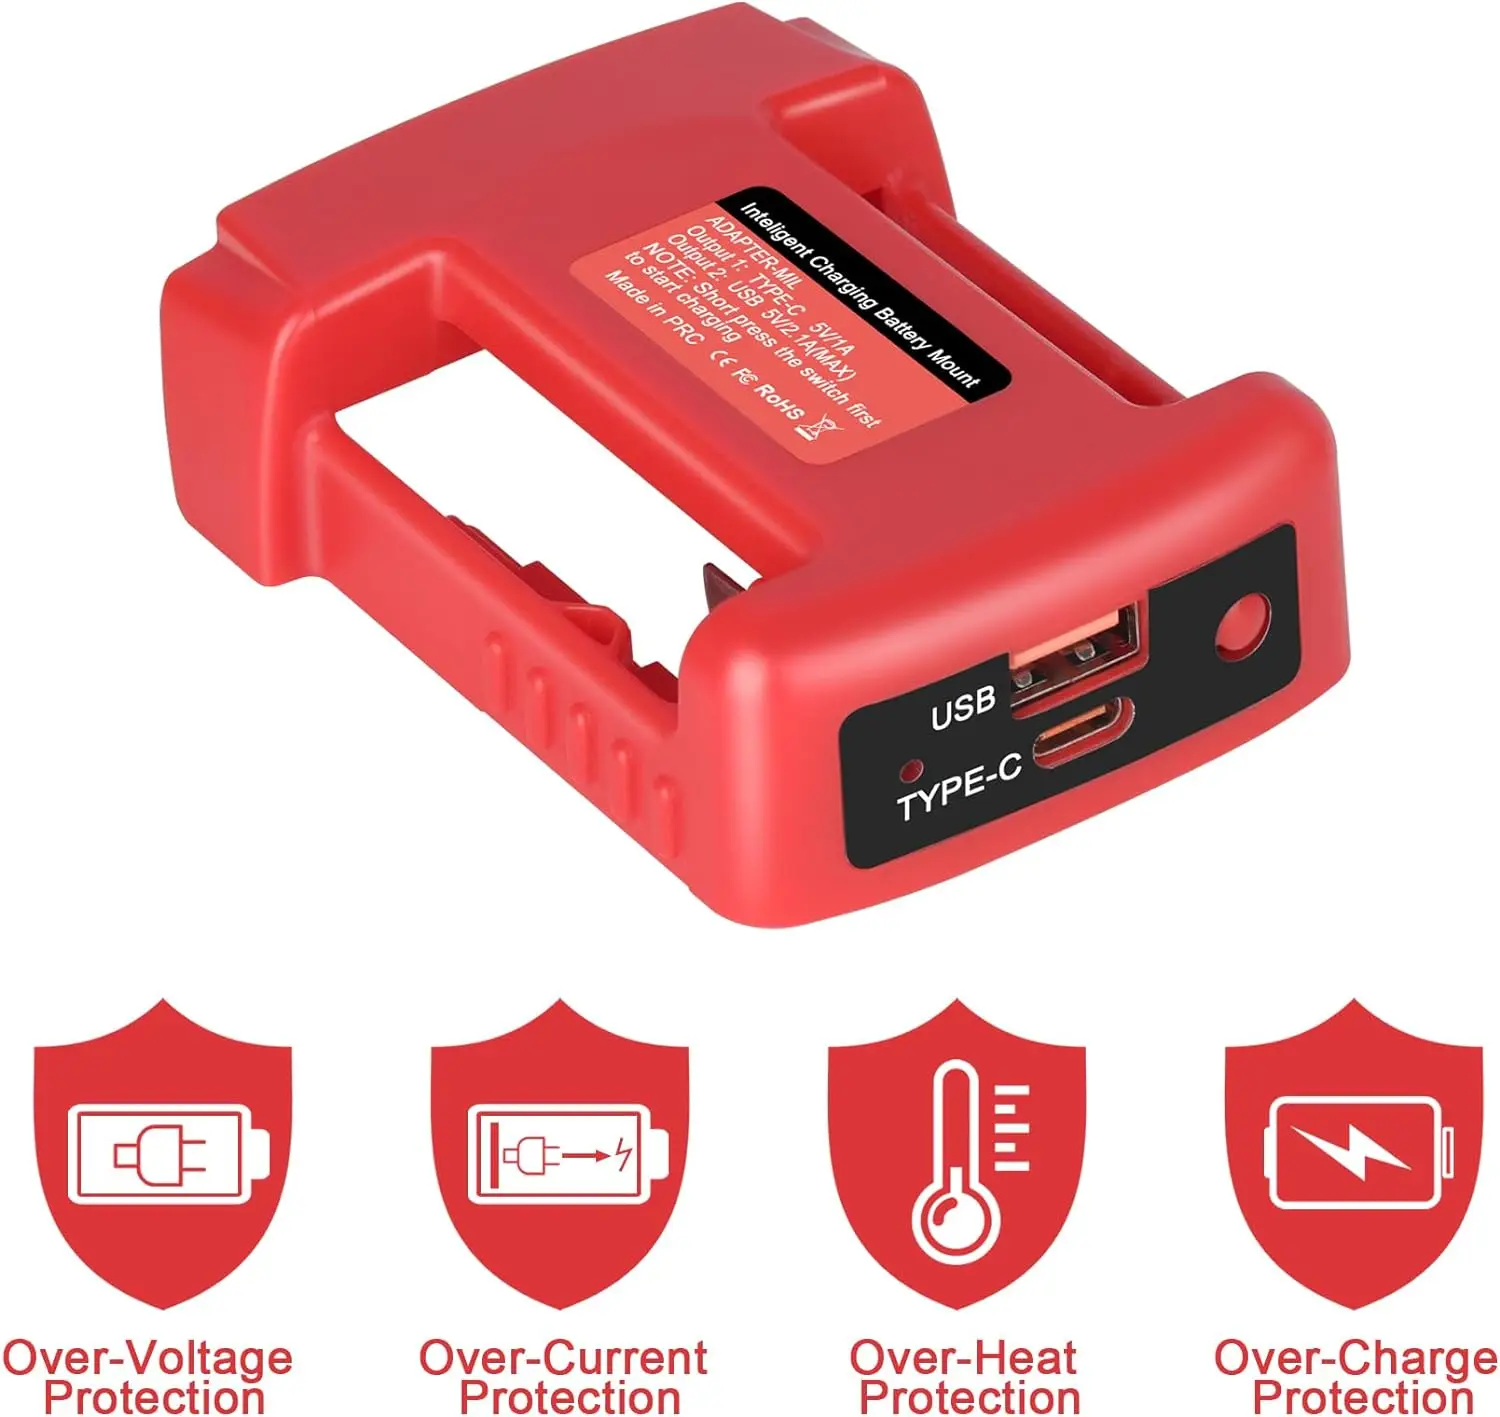 USB Charger Adapter for Milwaukee 18V Battery Adapter with Type-C USB Output Port with Charging Function for Outdoor Indoor Work